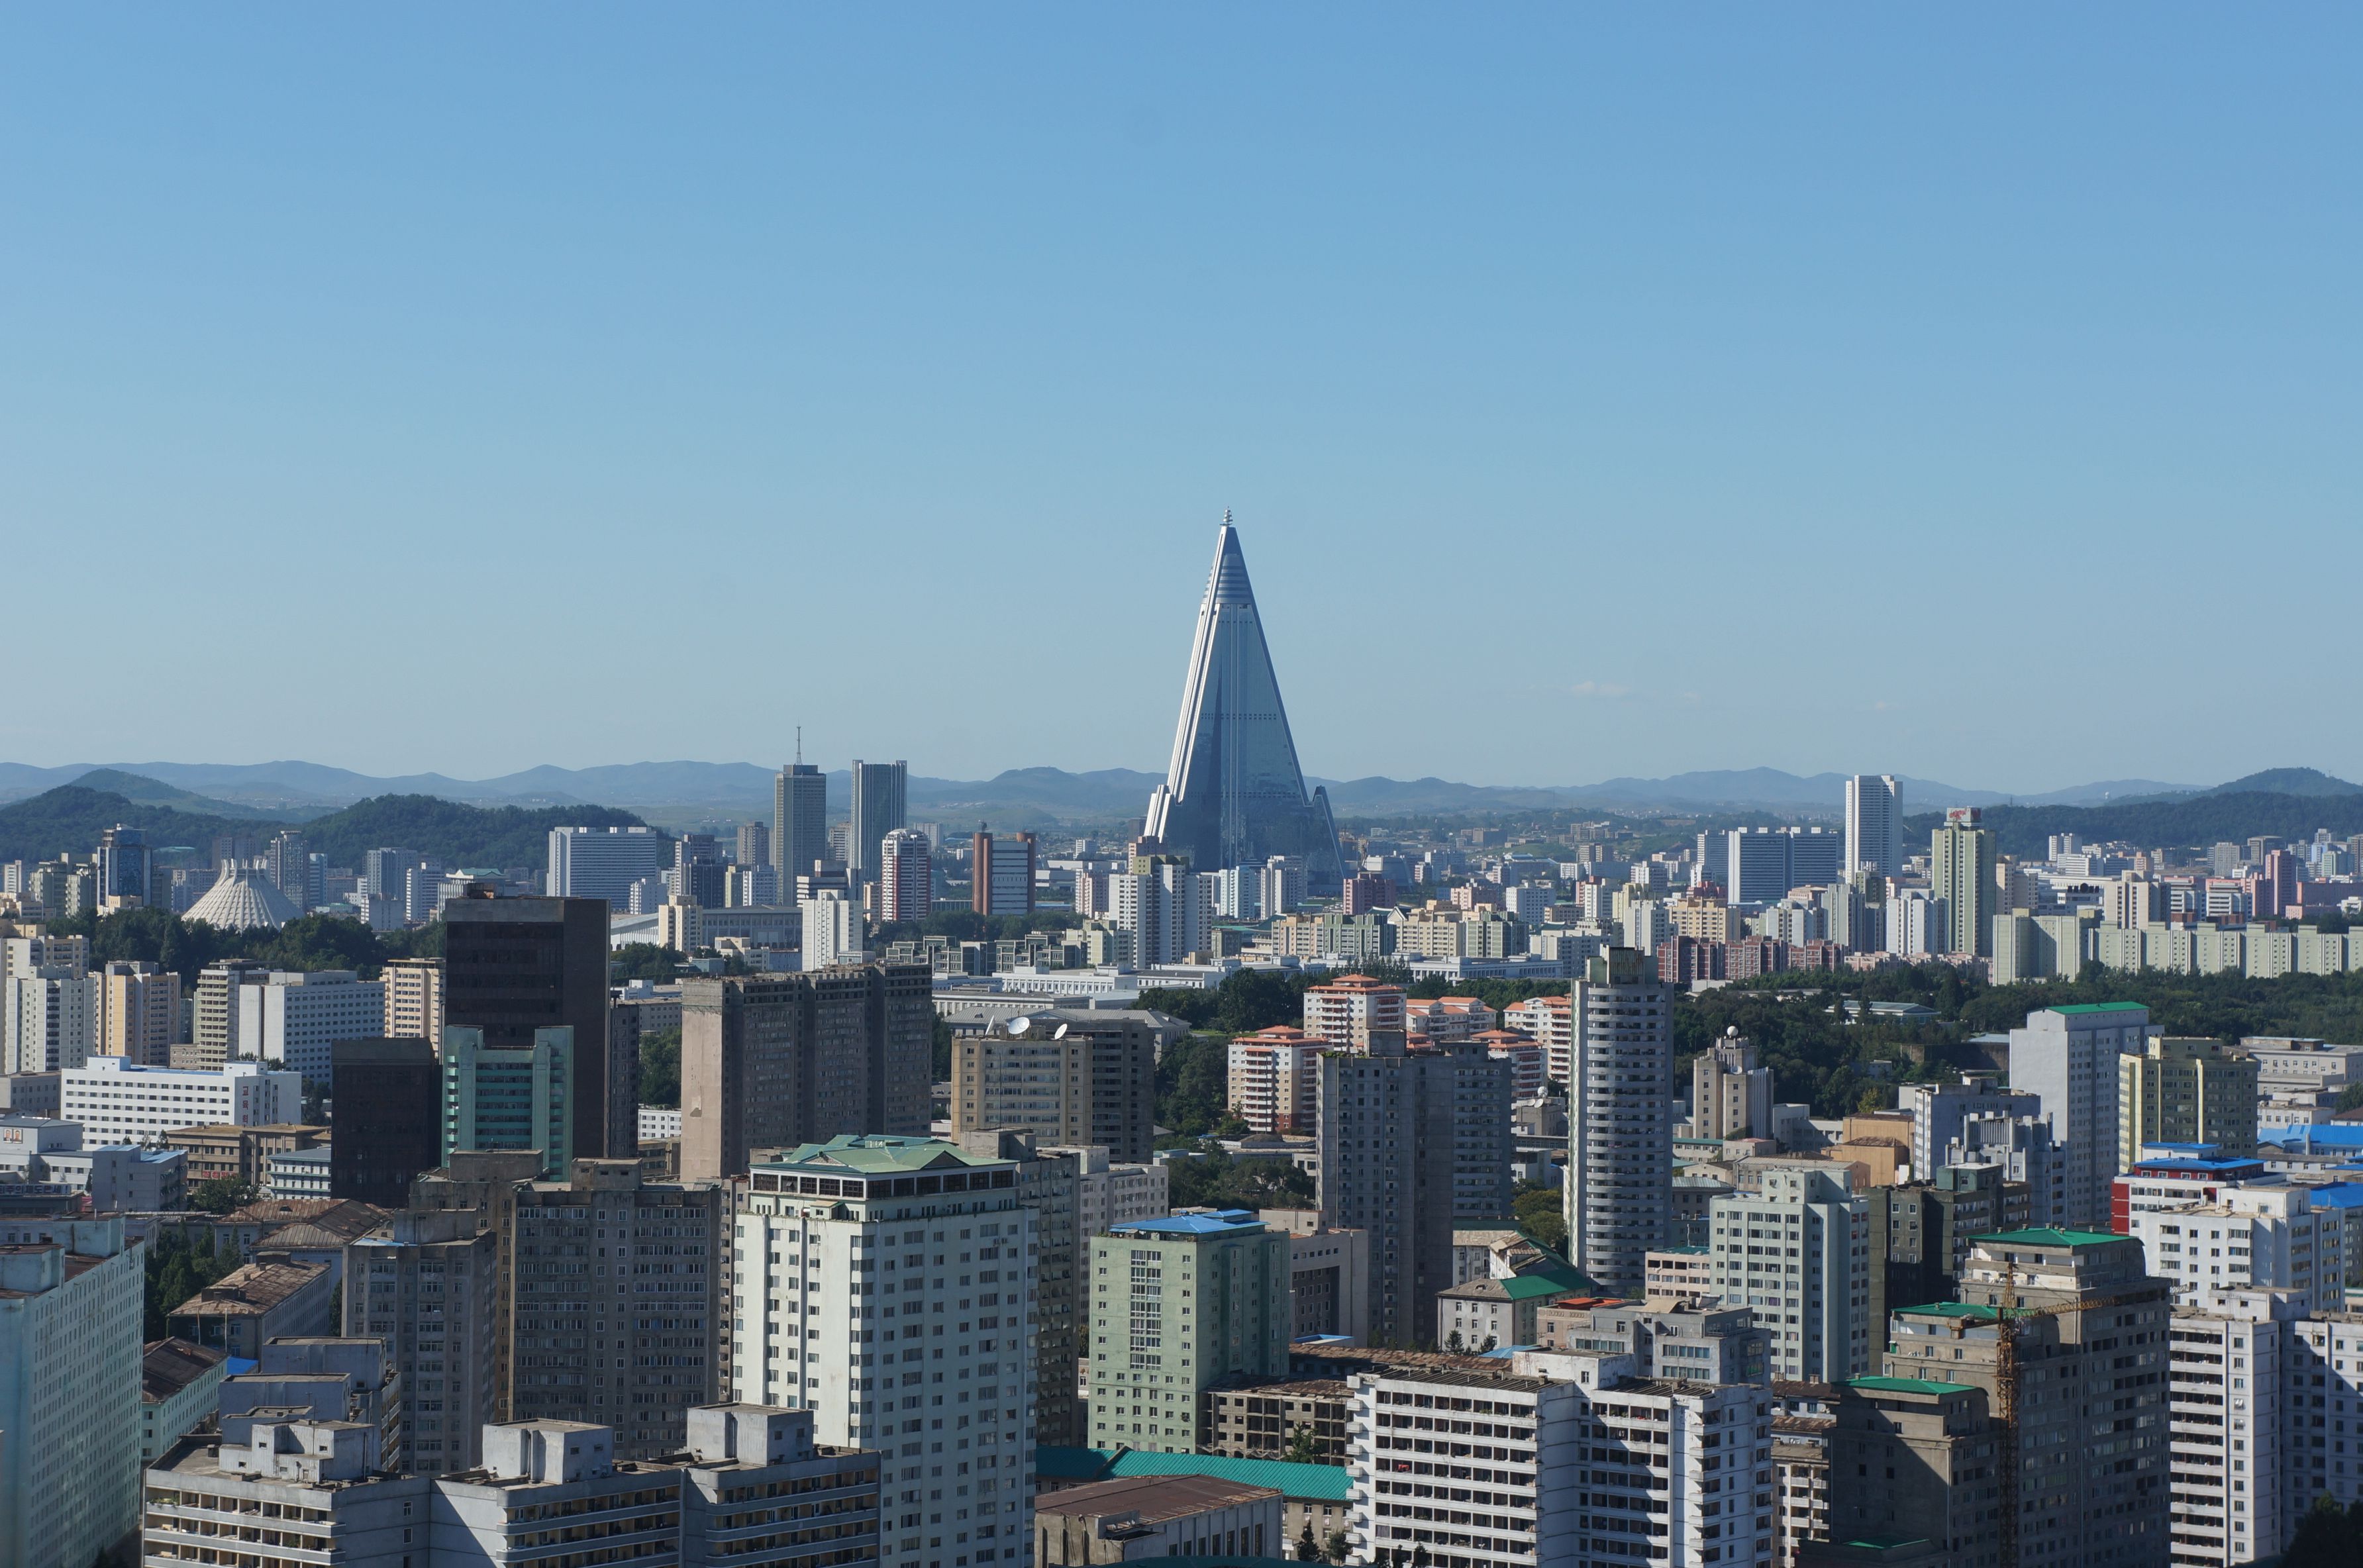 File:Pyongyang City - Ryugyong Hotel in Background (13913572409 ...